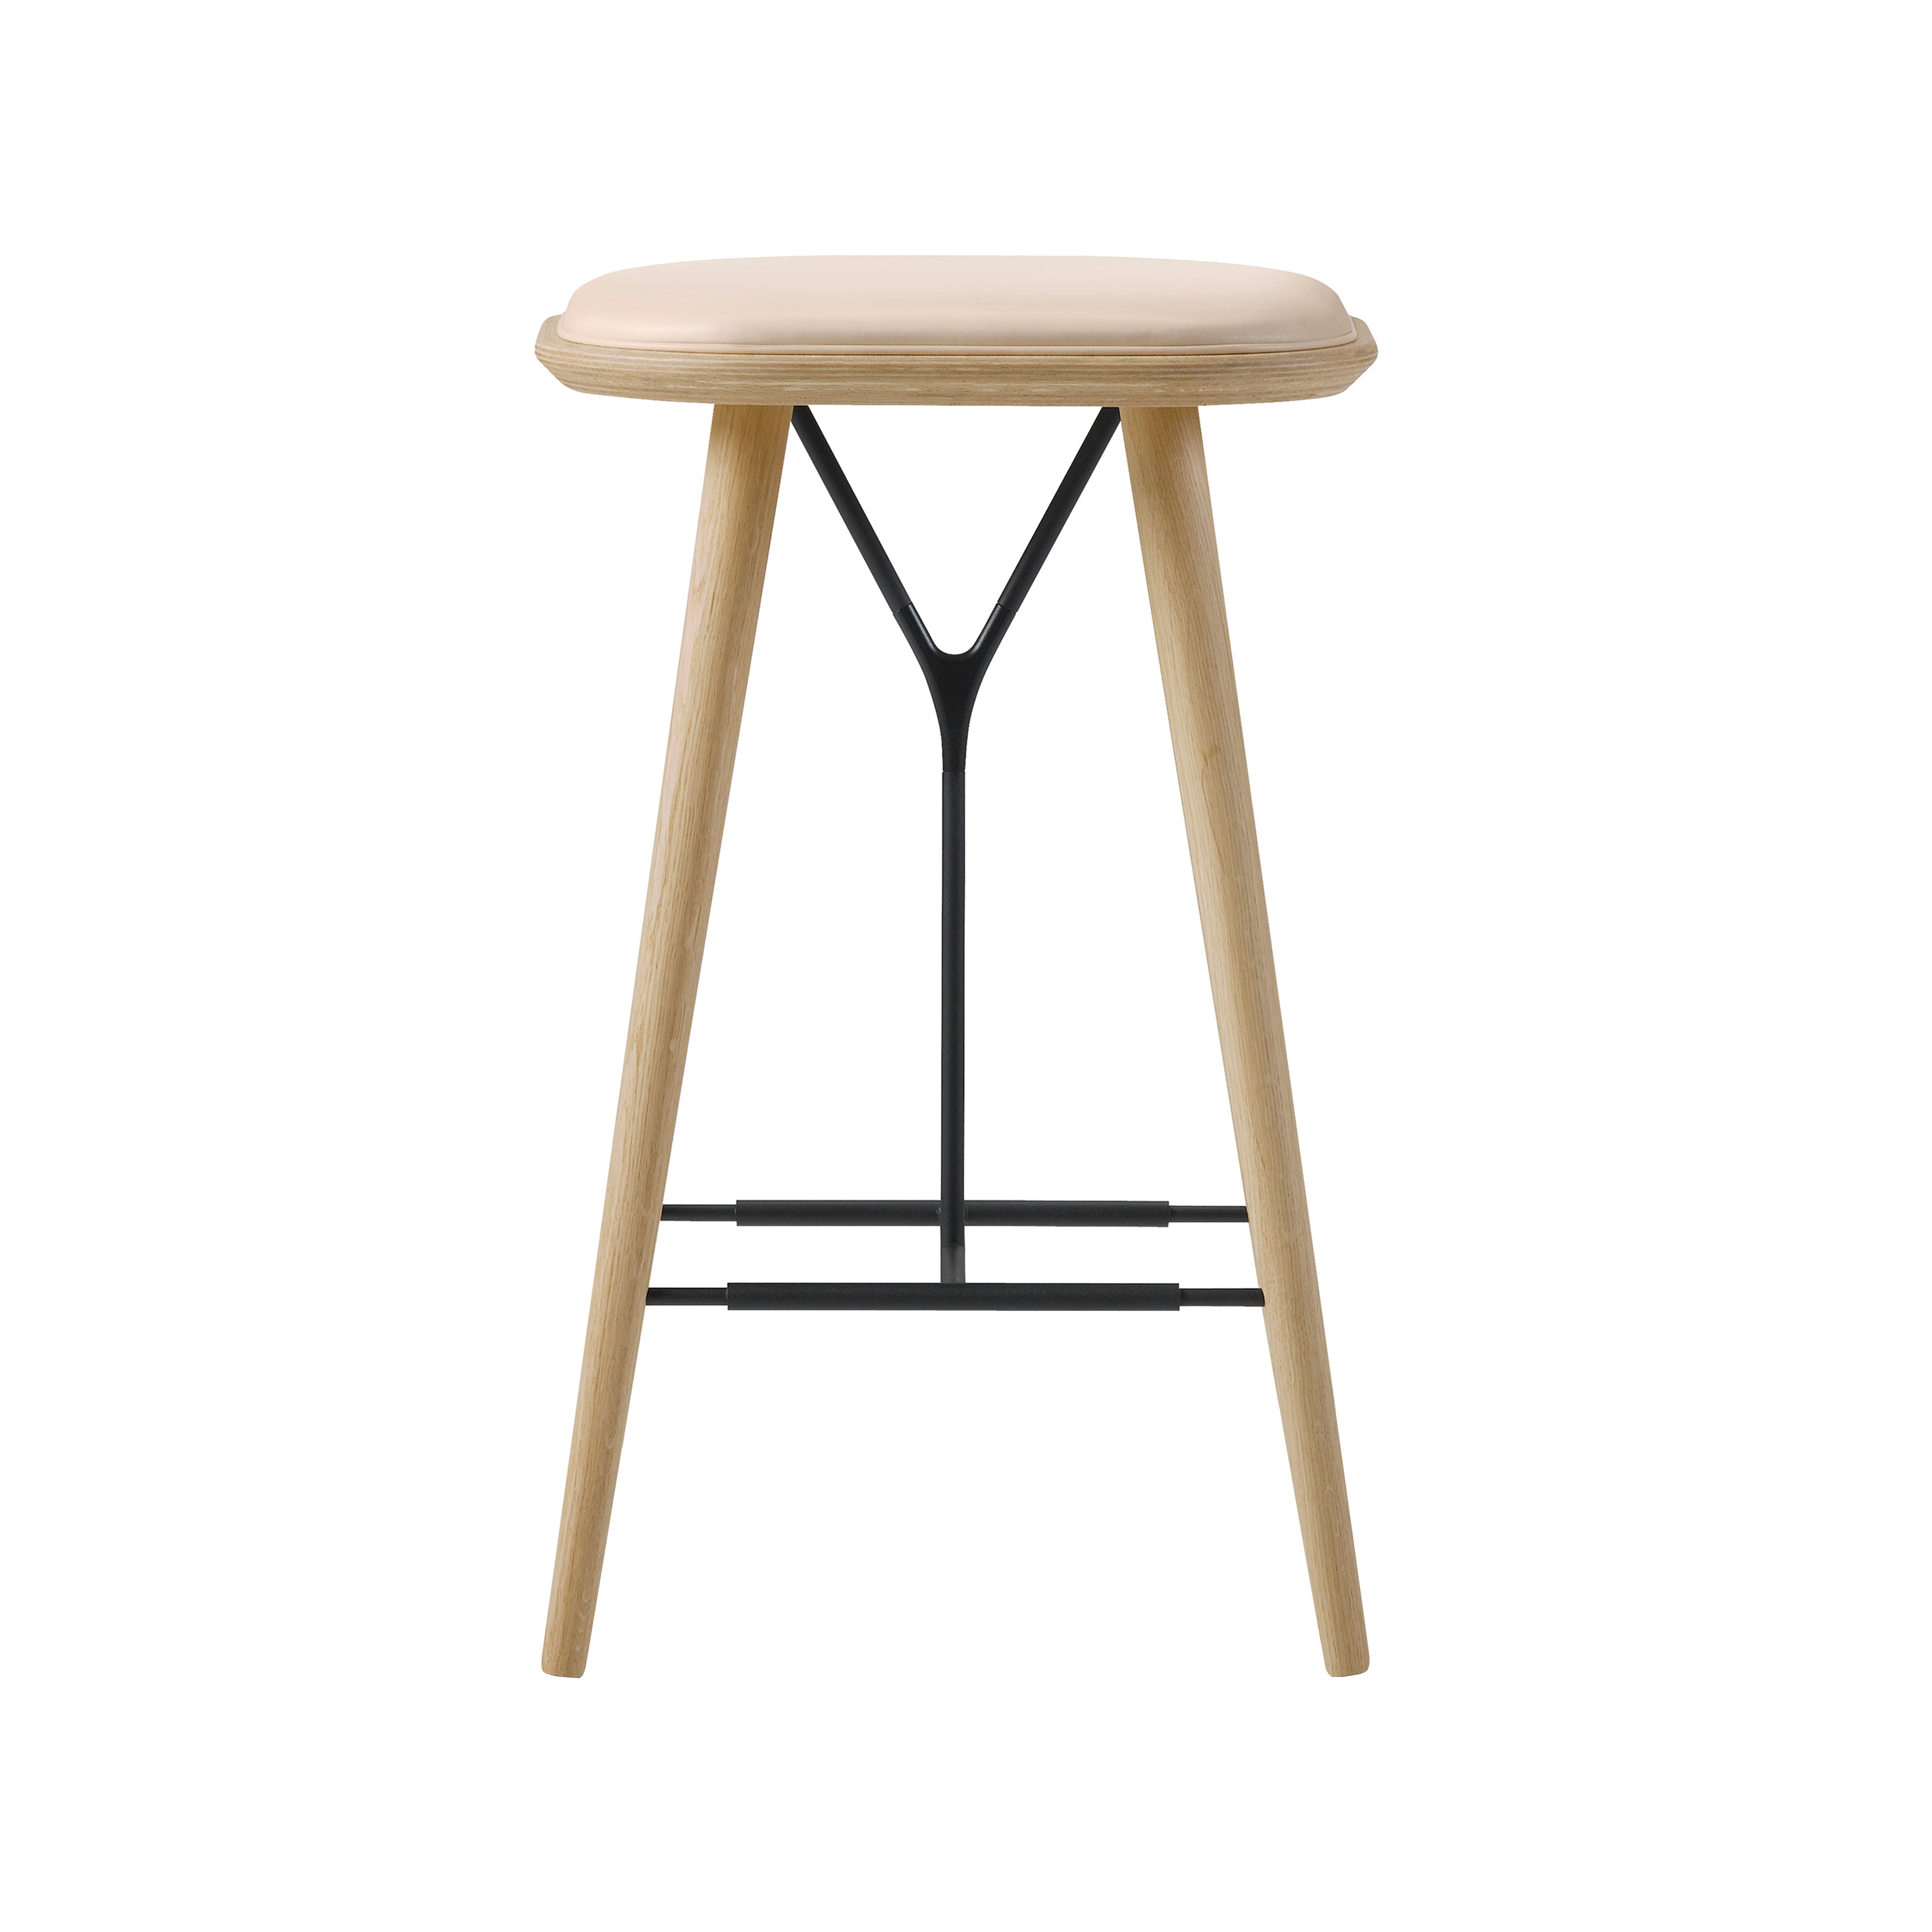 Spine Bar + Counter Stool: Wood Base + Counter + Lacquered Oak